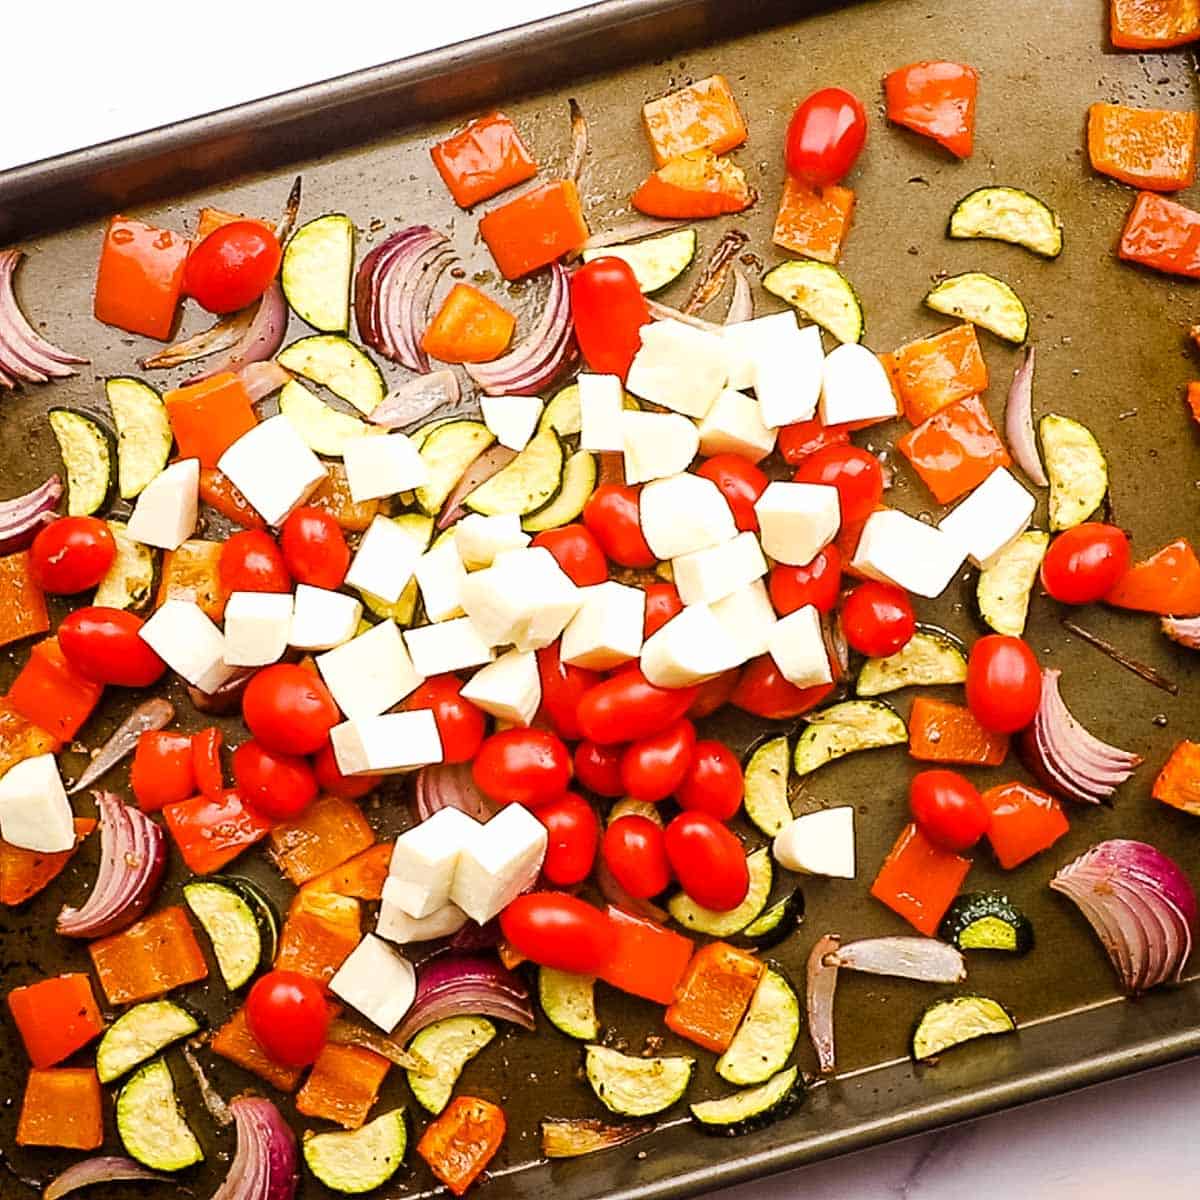 Halloumi cheese and grape tomatoes on a baking sheet with roasted vegetables.